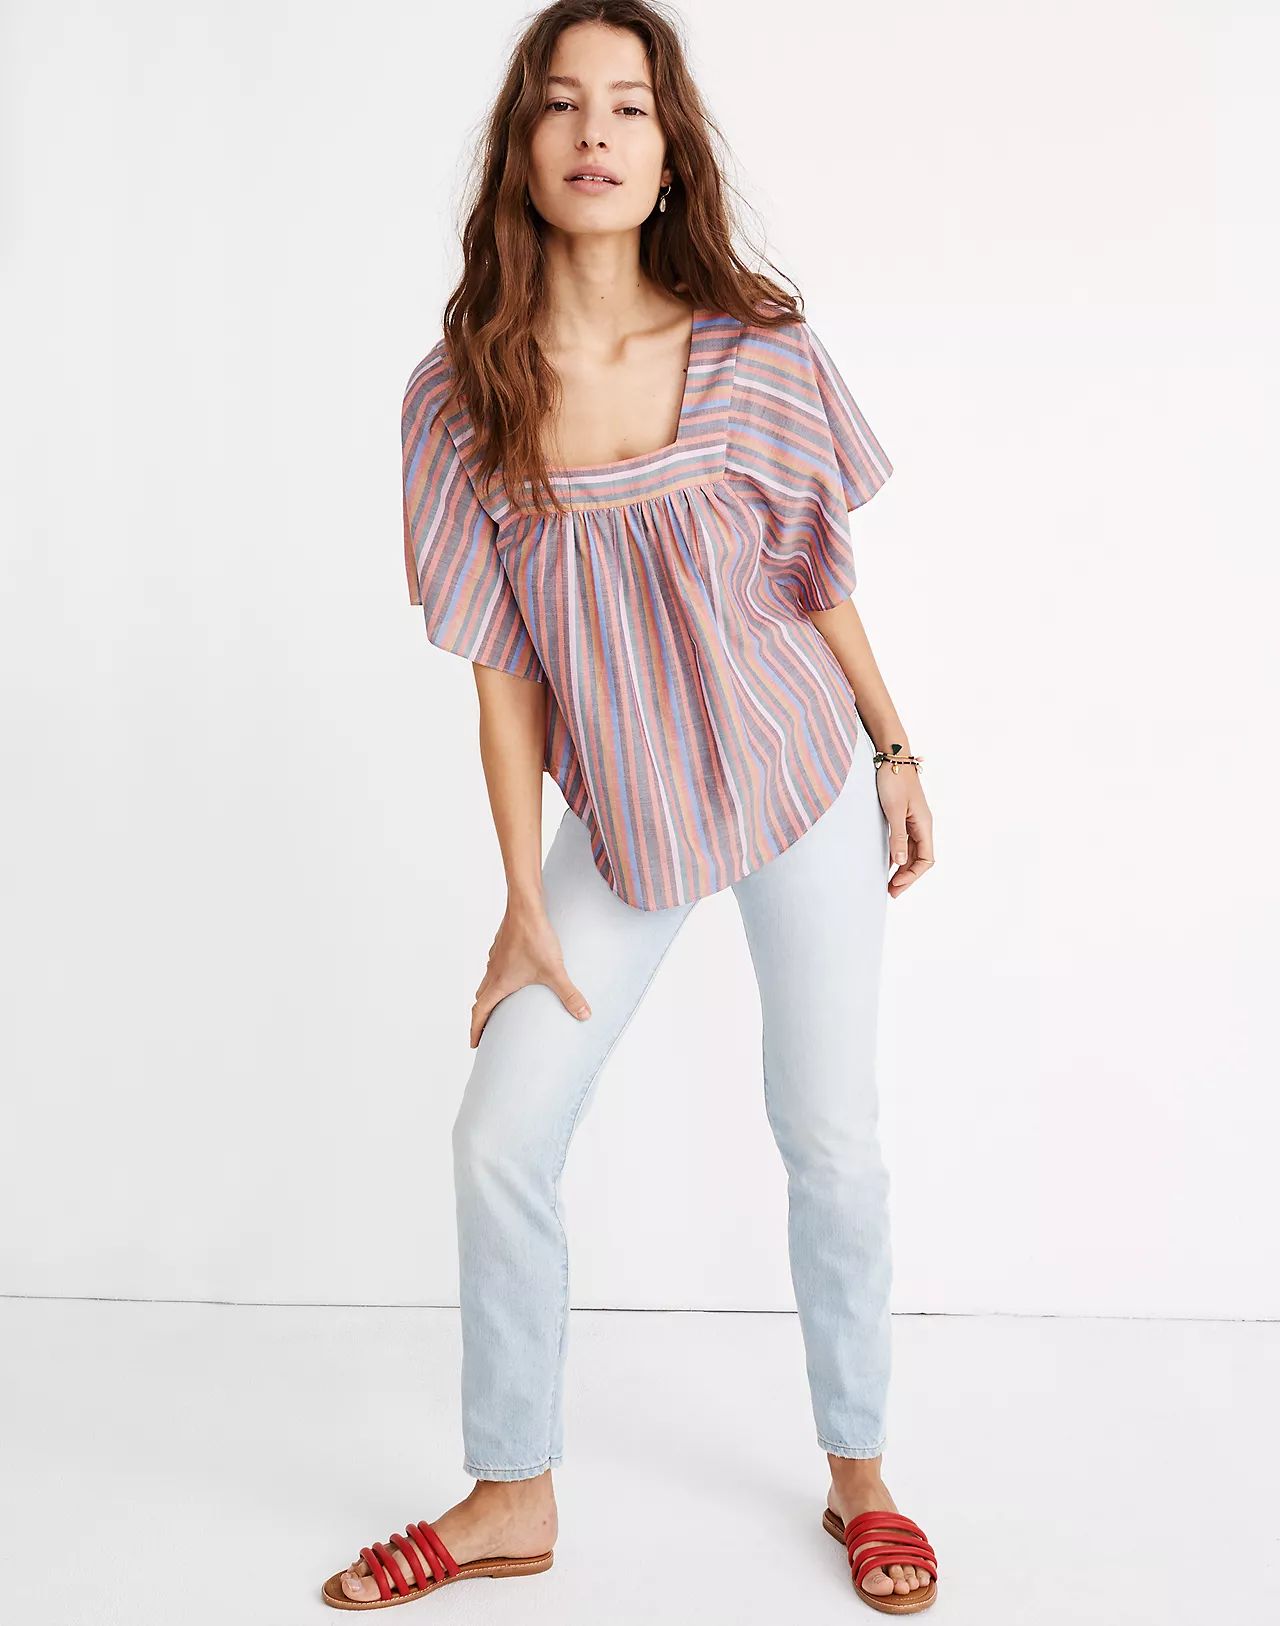 Butterfly Top in Rainbow Stripe | Madewell